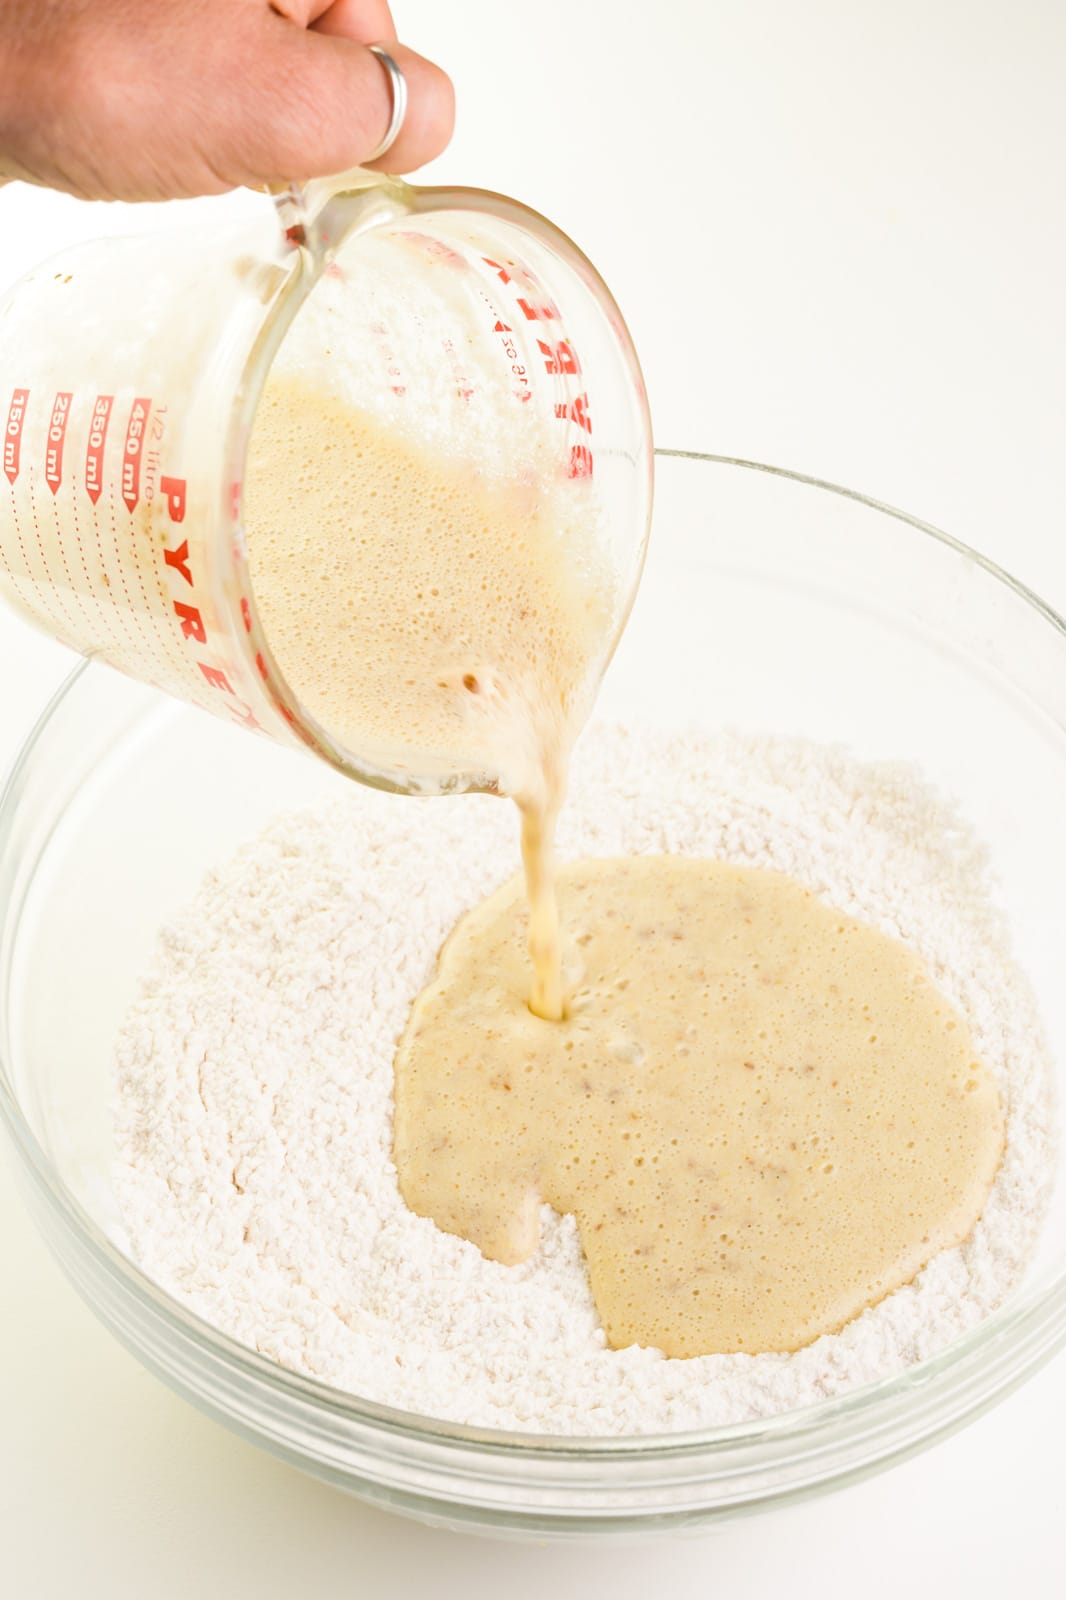 A hand holds a pyrex measuring cup full of a yeast mixture. It's being poured into a flour mixture.